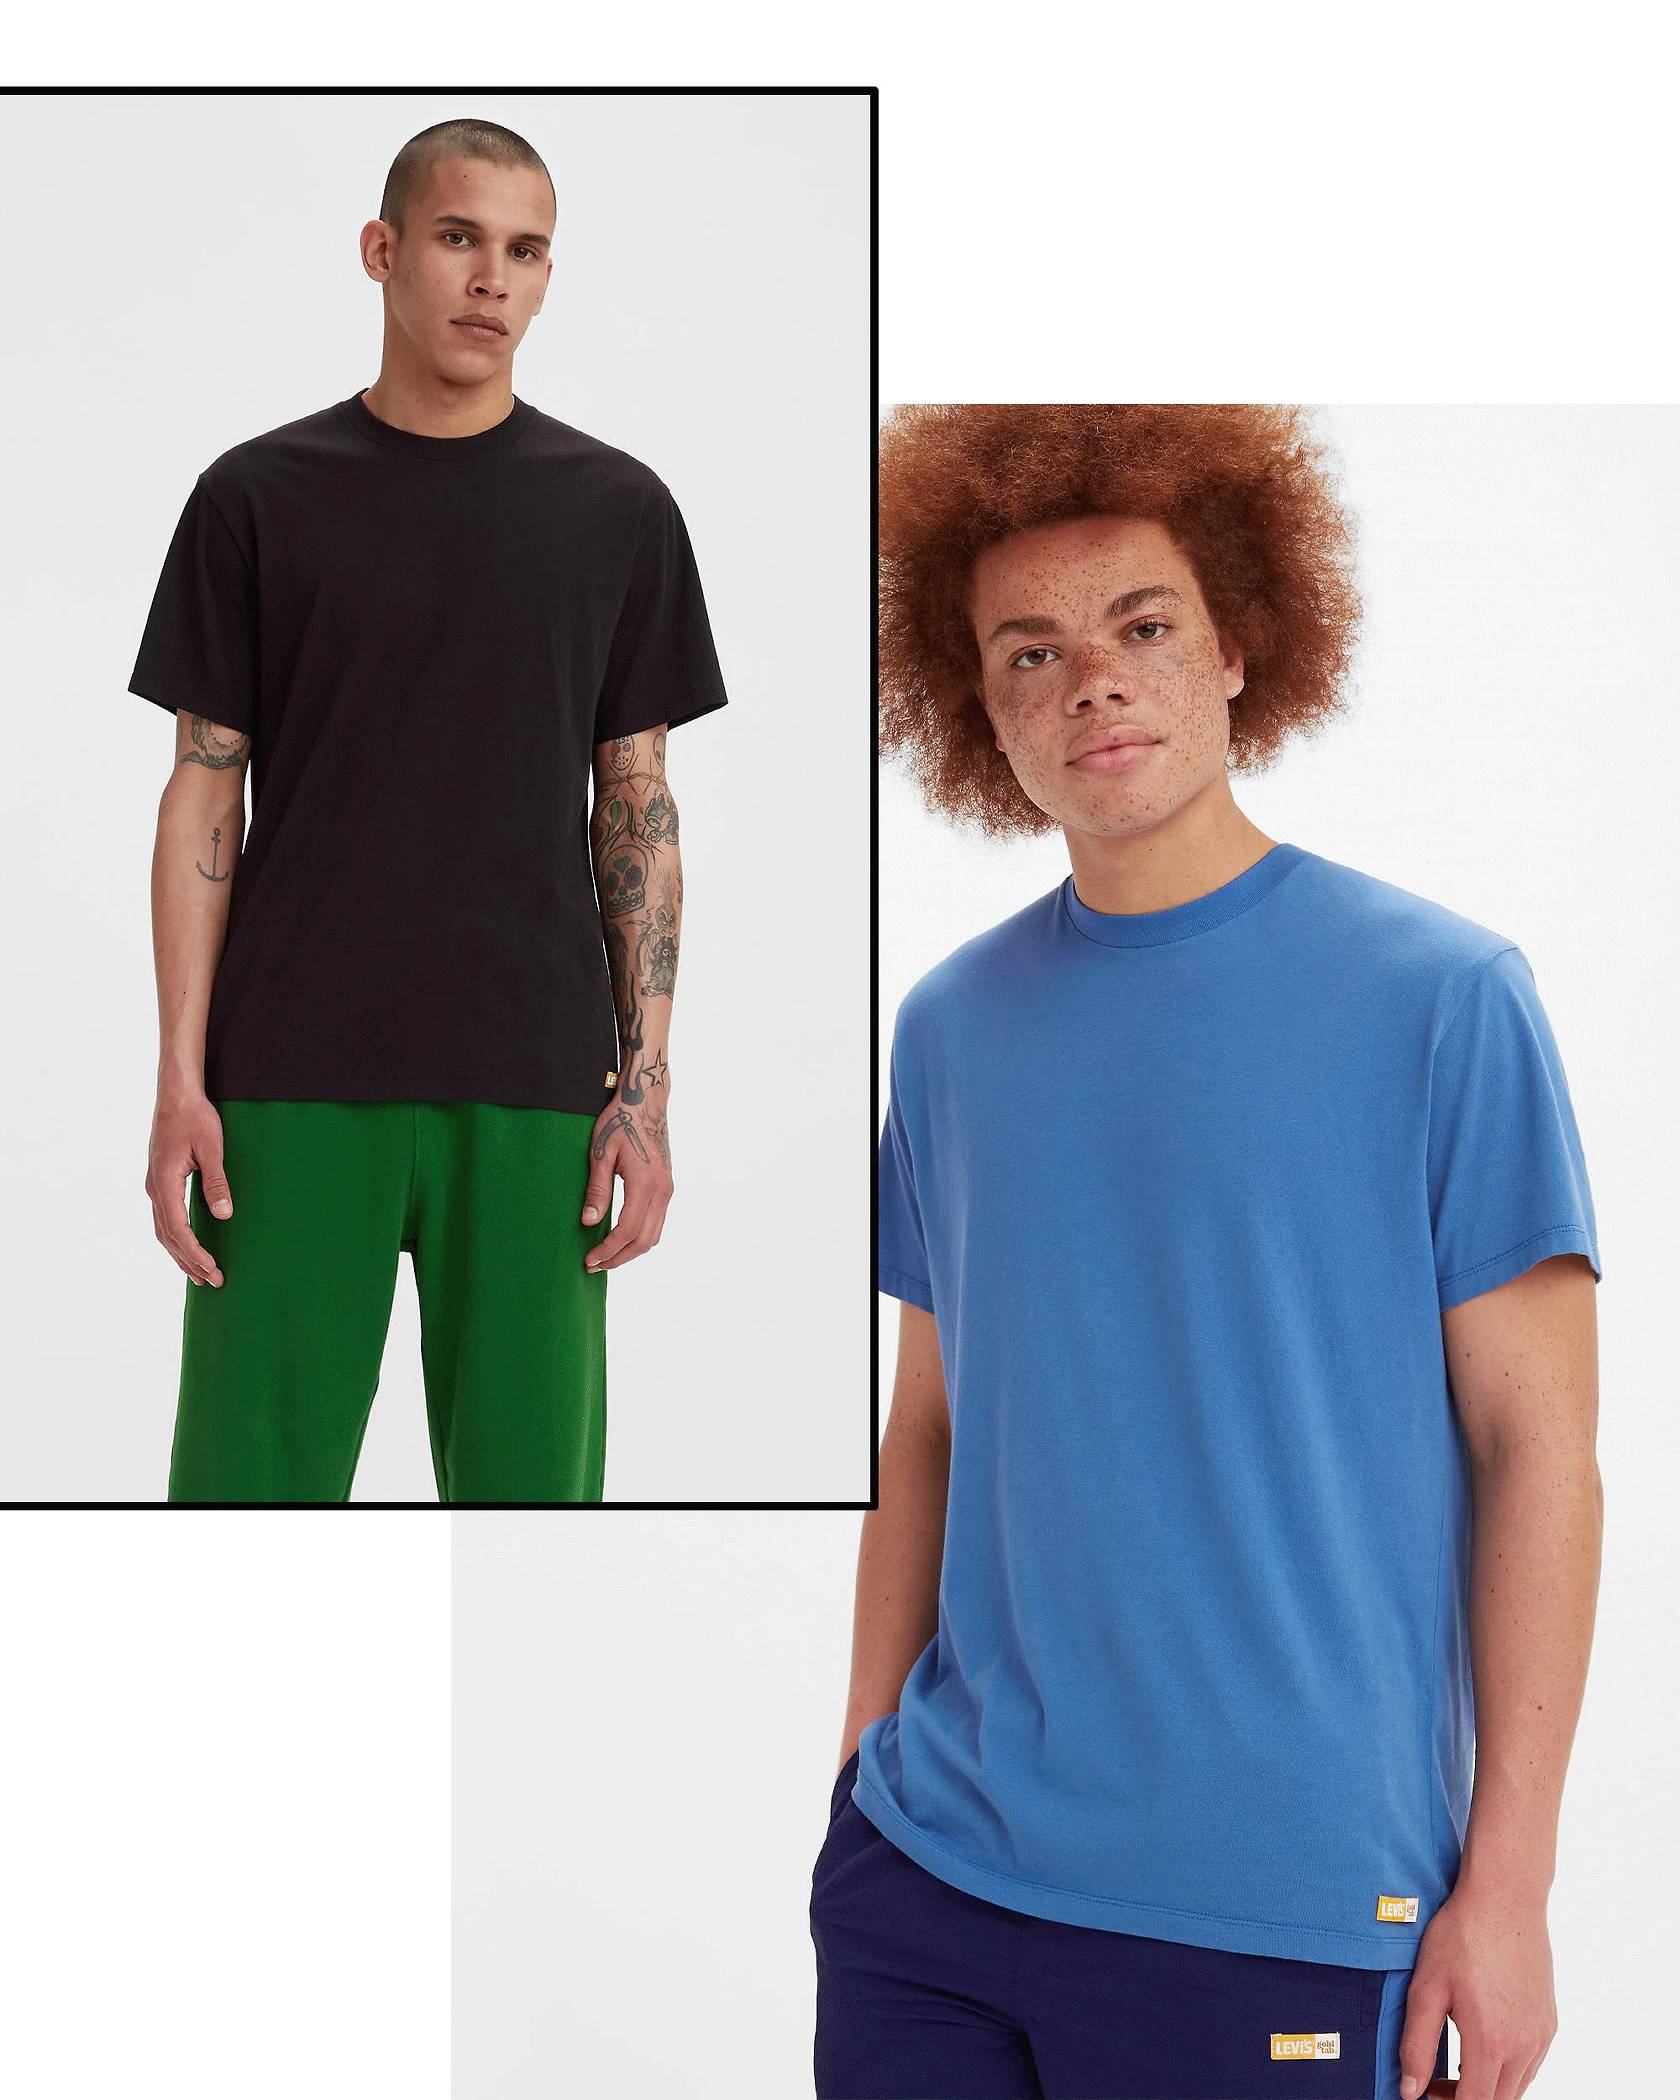 Men's Tees: Find Your Fit with Classic New Styles | Off The Cuff